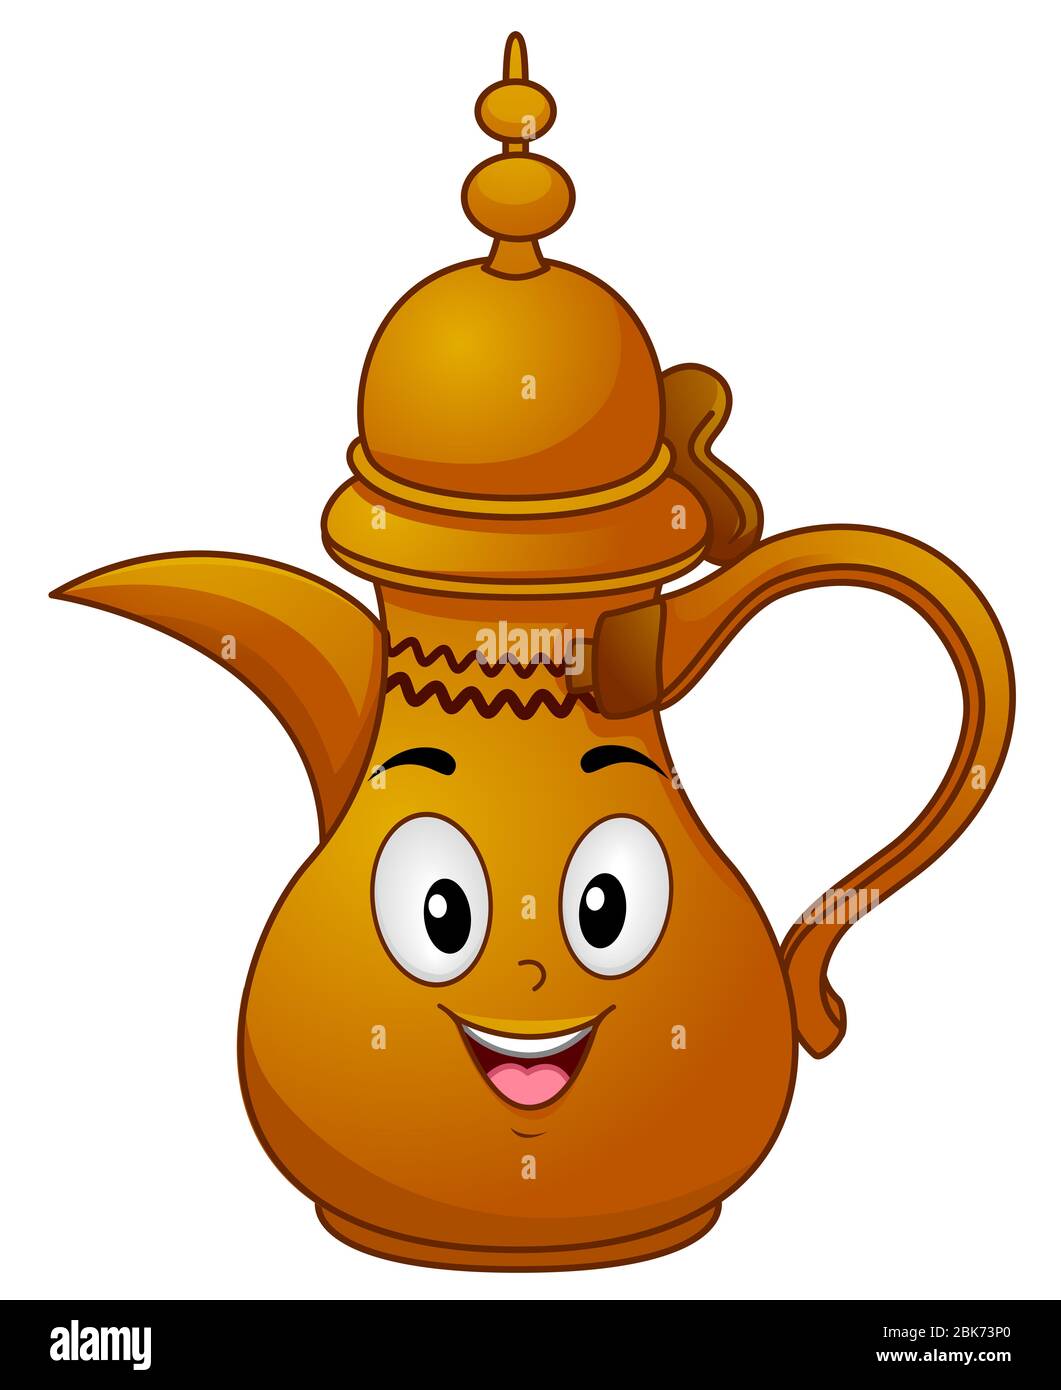 Illustration of Dallah, a Traditional Arabic Coffee Pot with Handle and Lid Stock Photo